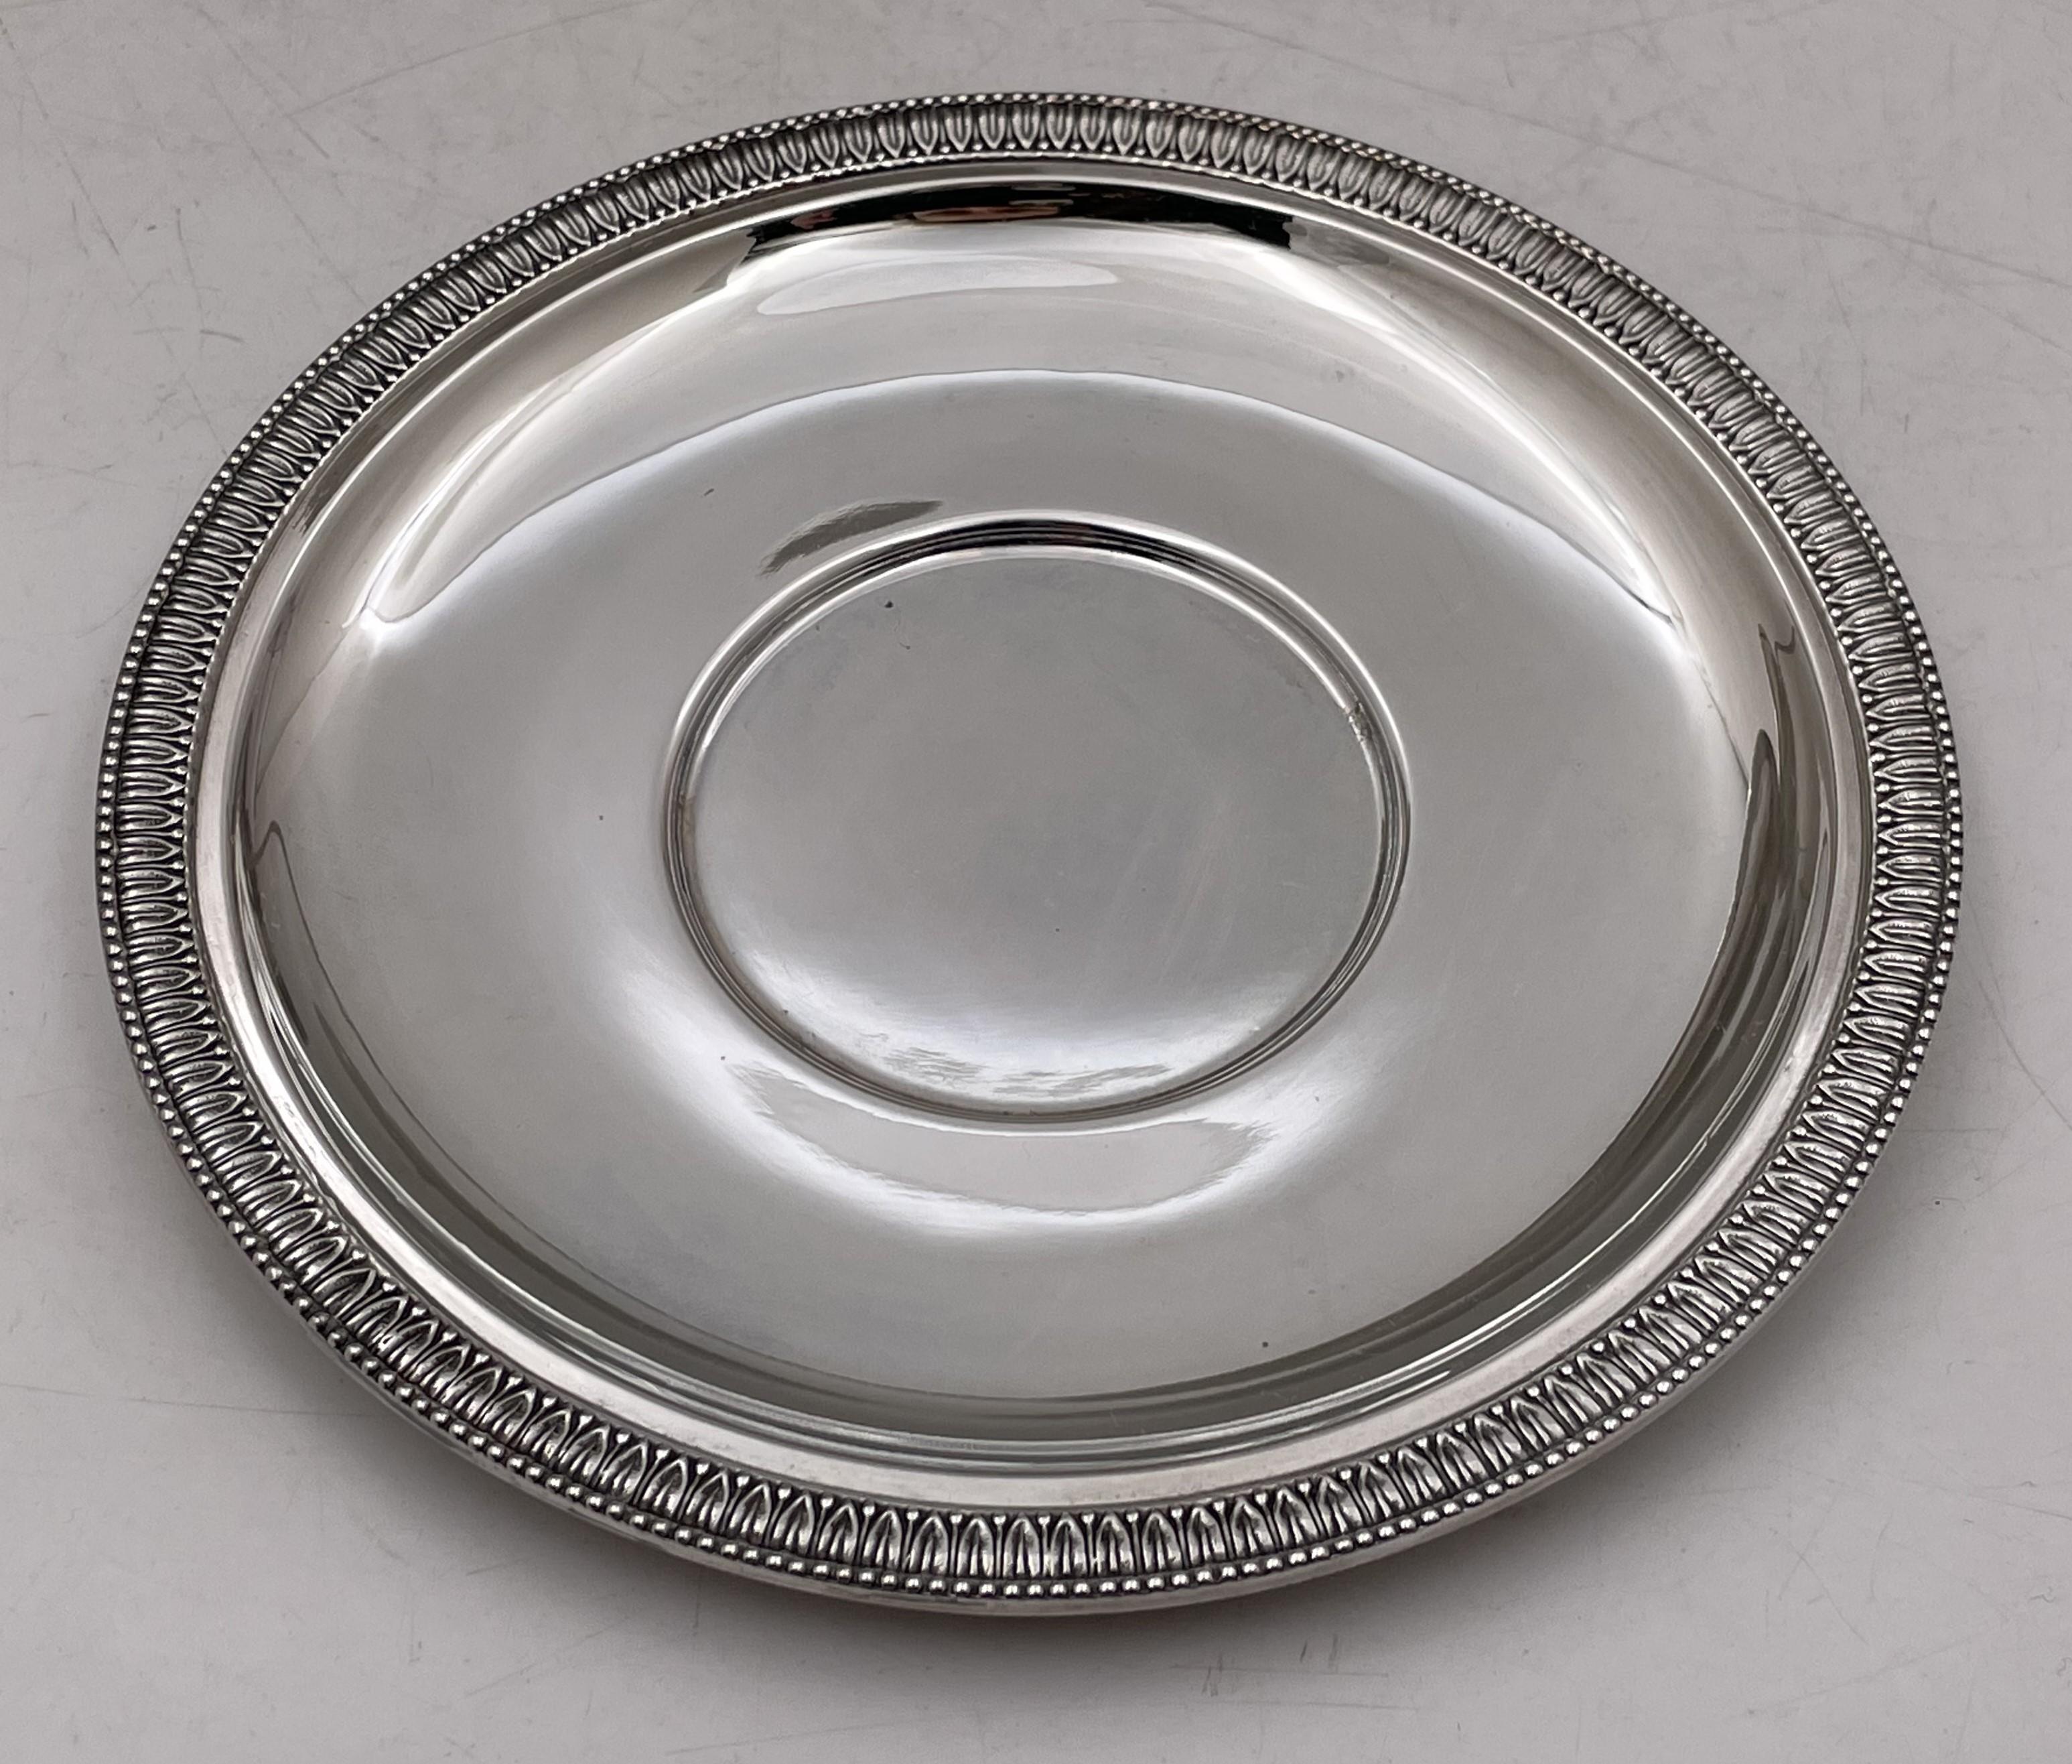 Ricci Italian Silver Set of 24 Dessert Compote Bowls & Underplates In Good Condition For Sale In New York, NY